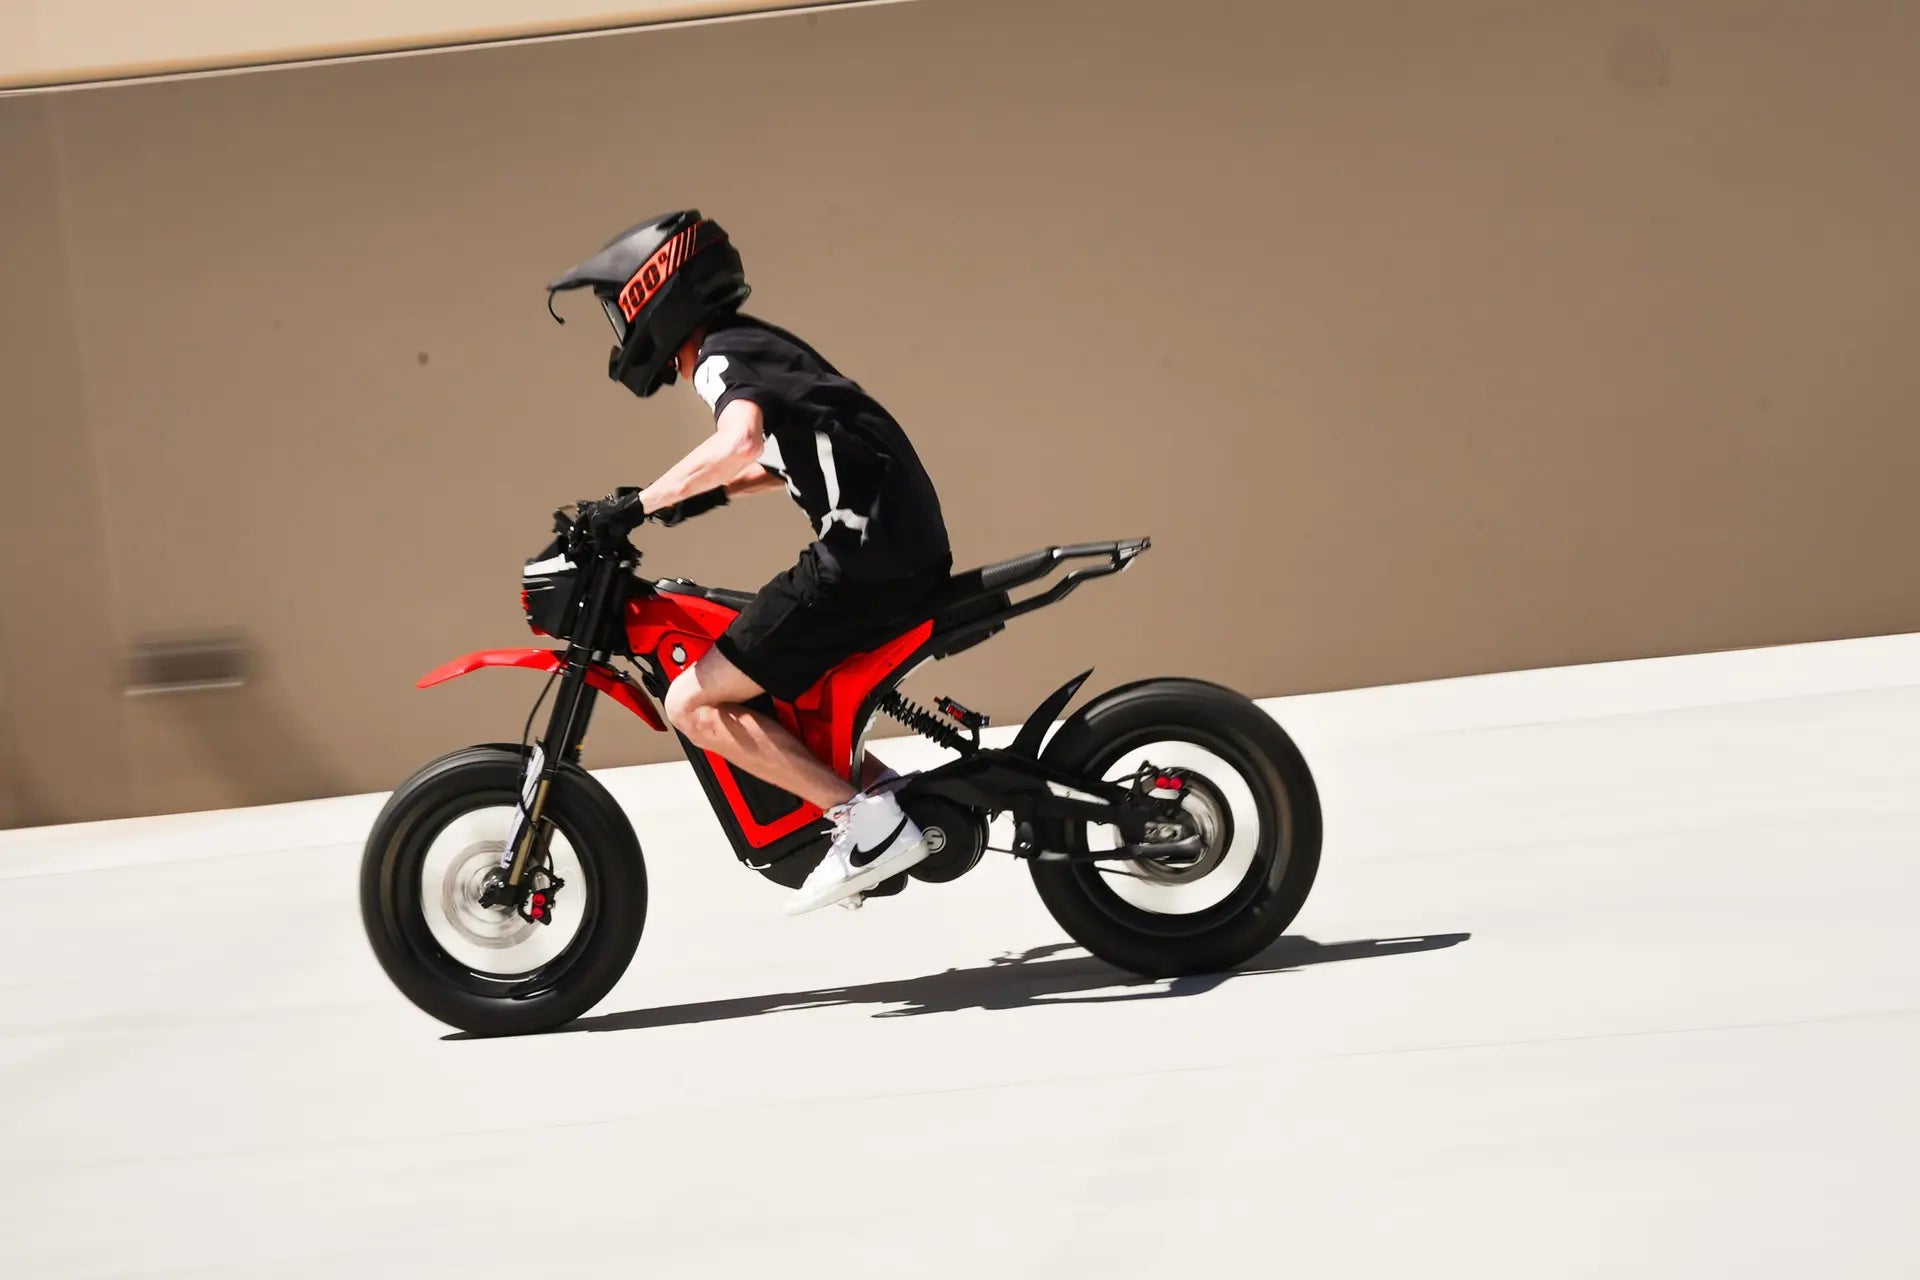 Sub-$7k electric motorcycle takes on the urban jungle